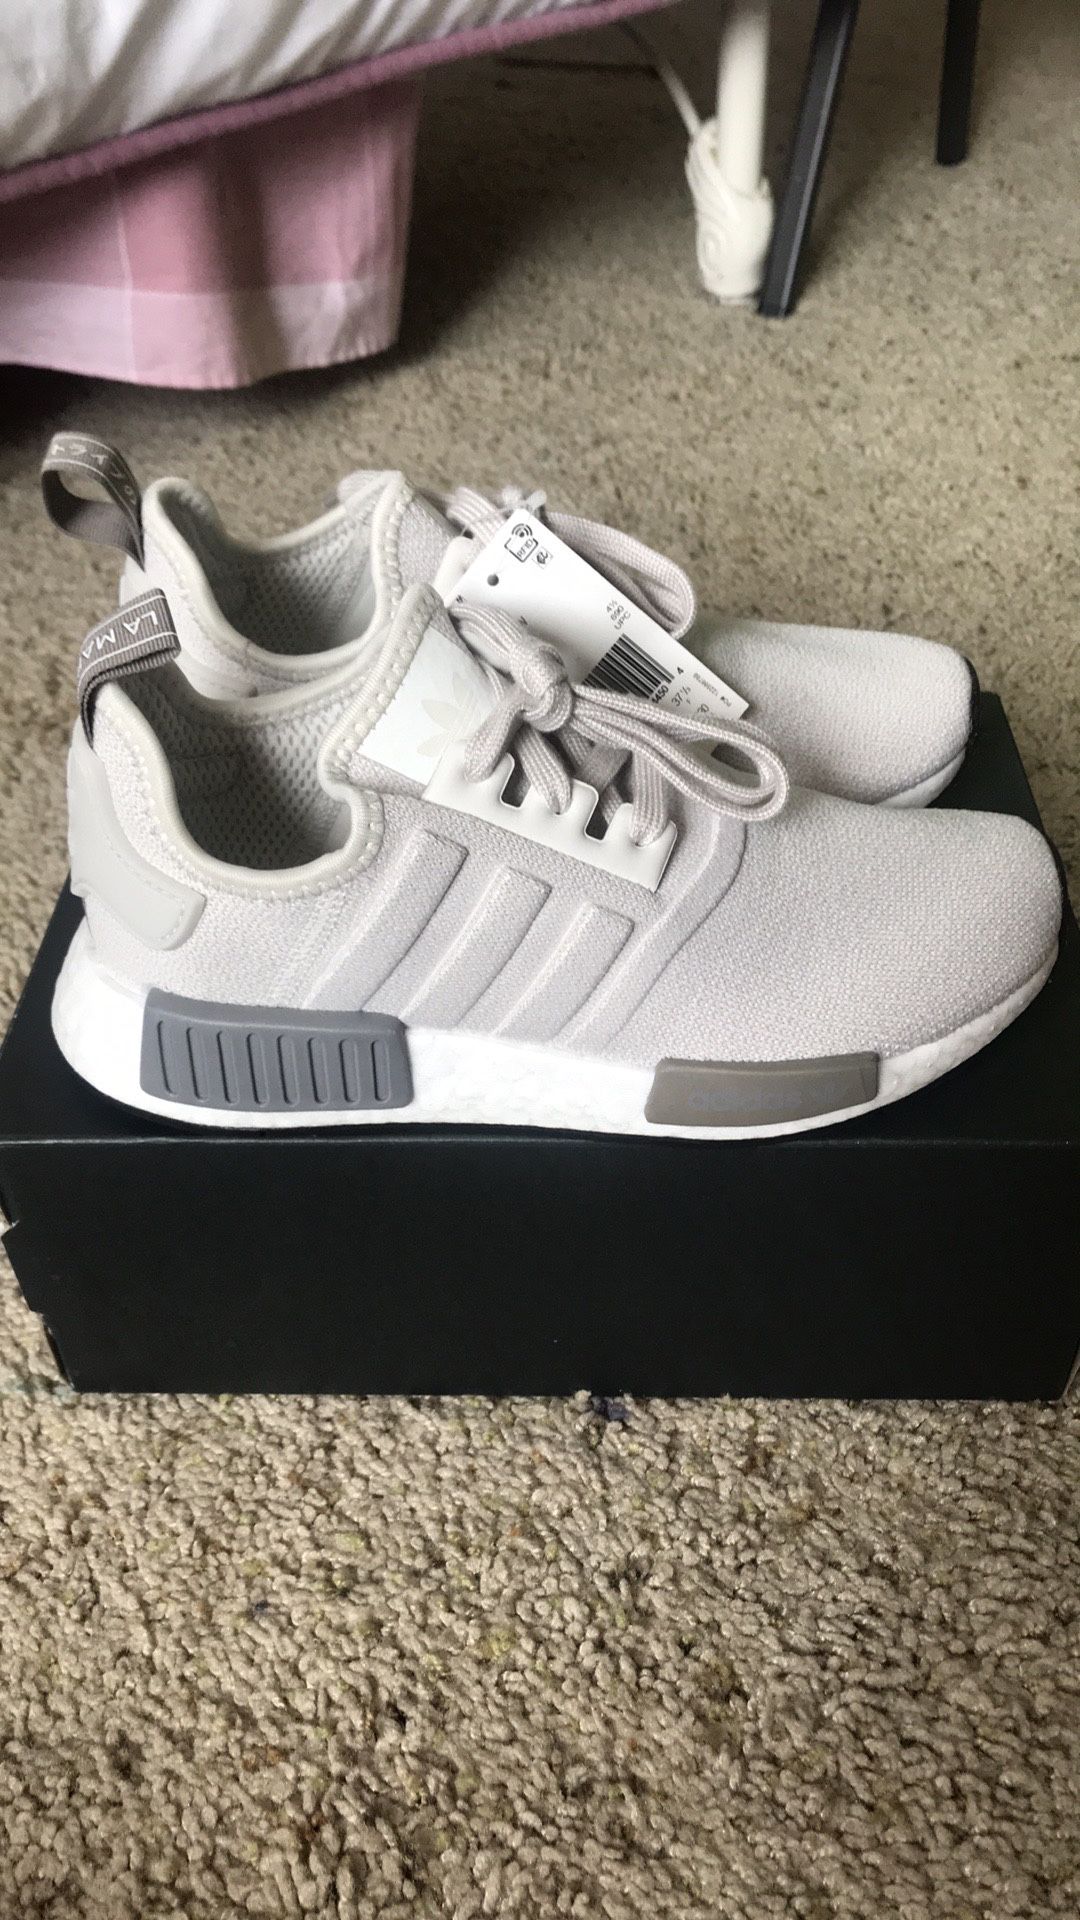 Adidas Womens NMD gray and white NWT